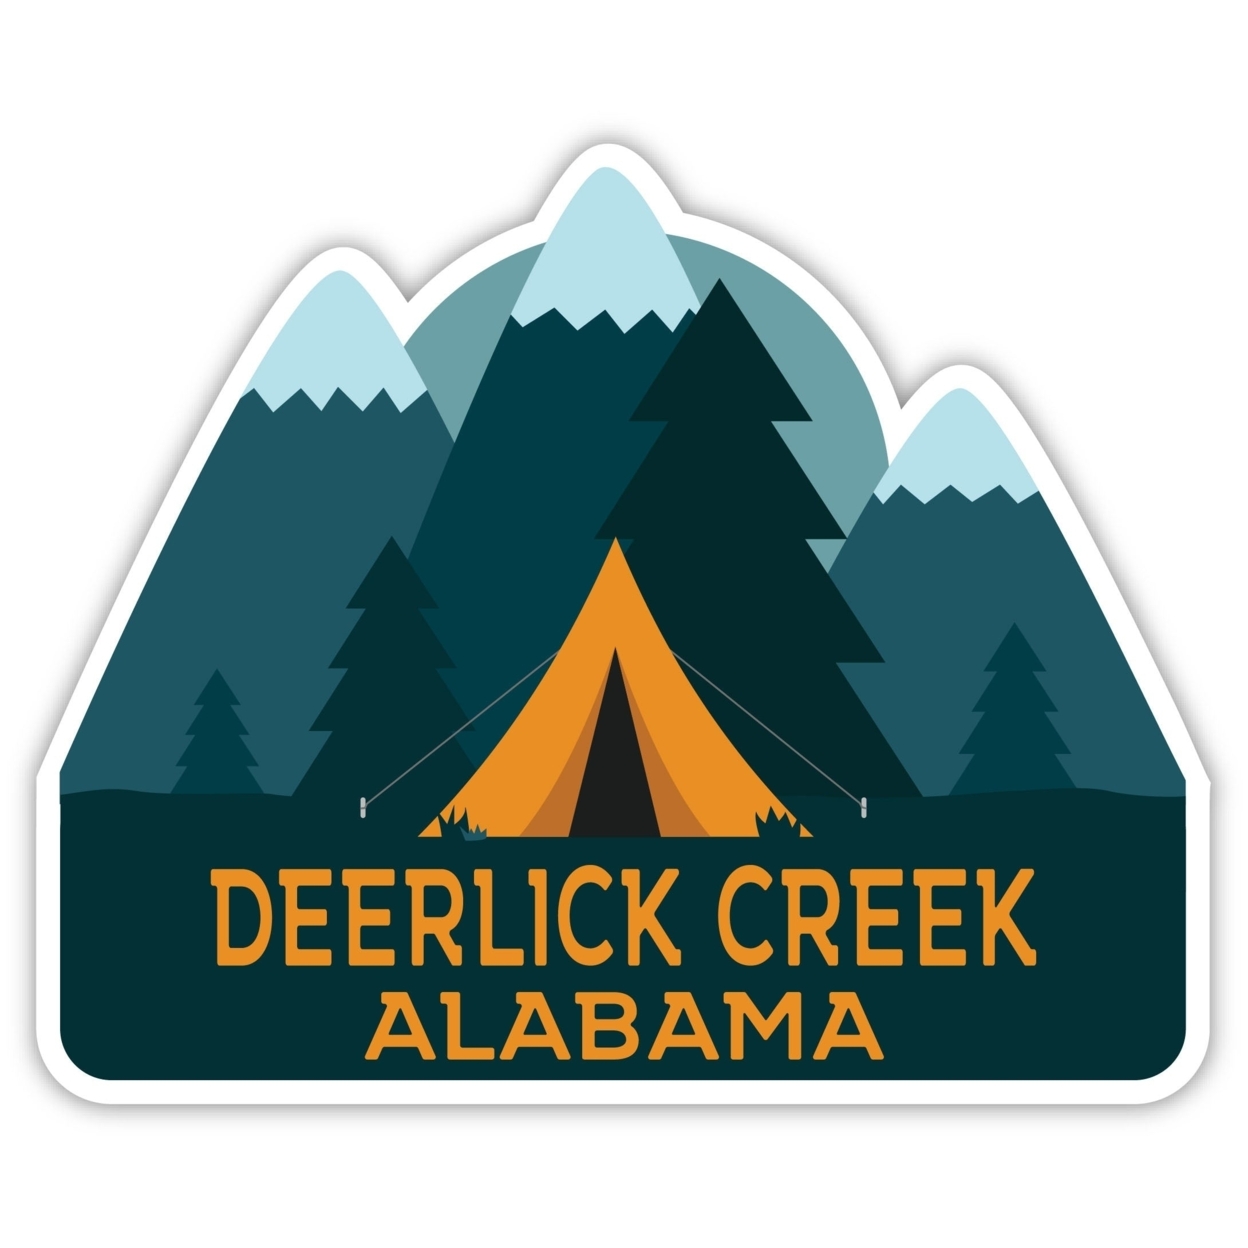 Deerlick Creek Alabama Souvenir Decorative Stickers (Choose Theme And Size) - 4-Pack, 10-Inch, Great Outdoors